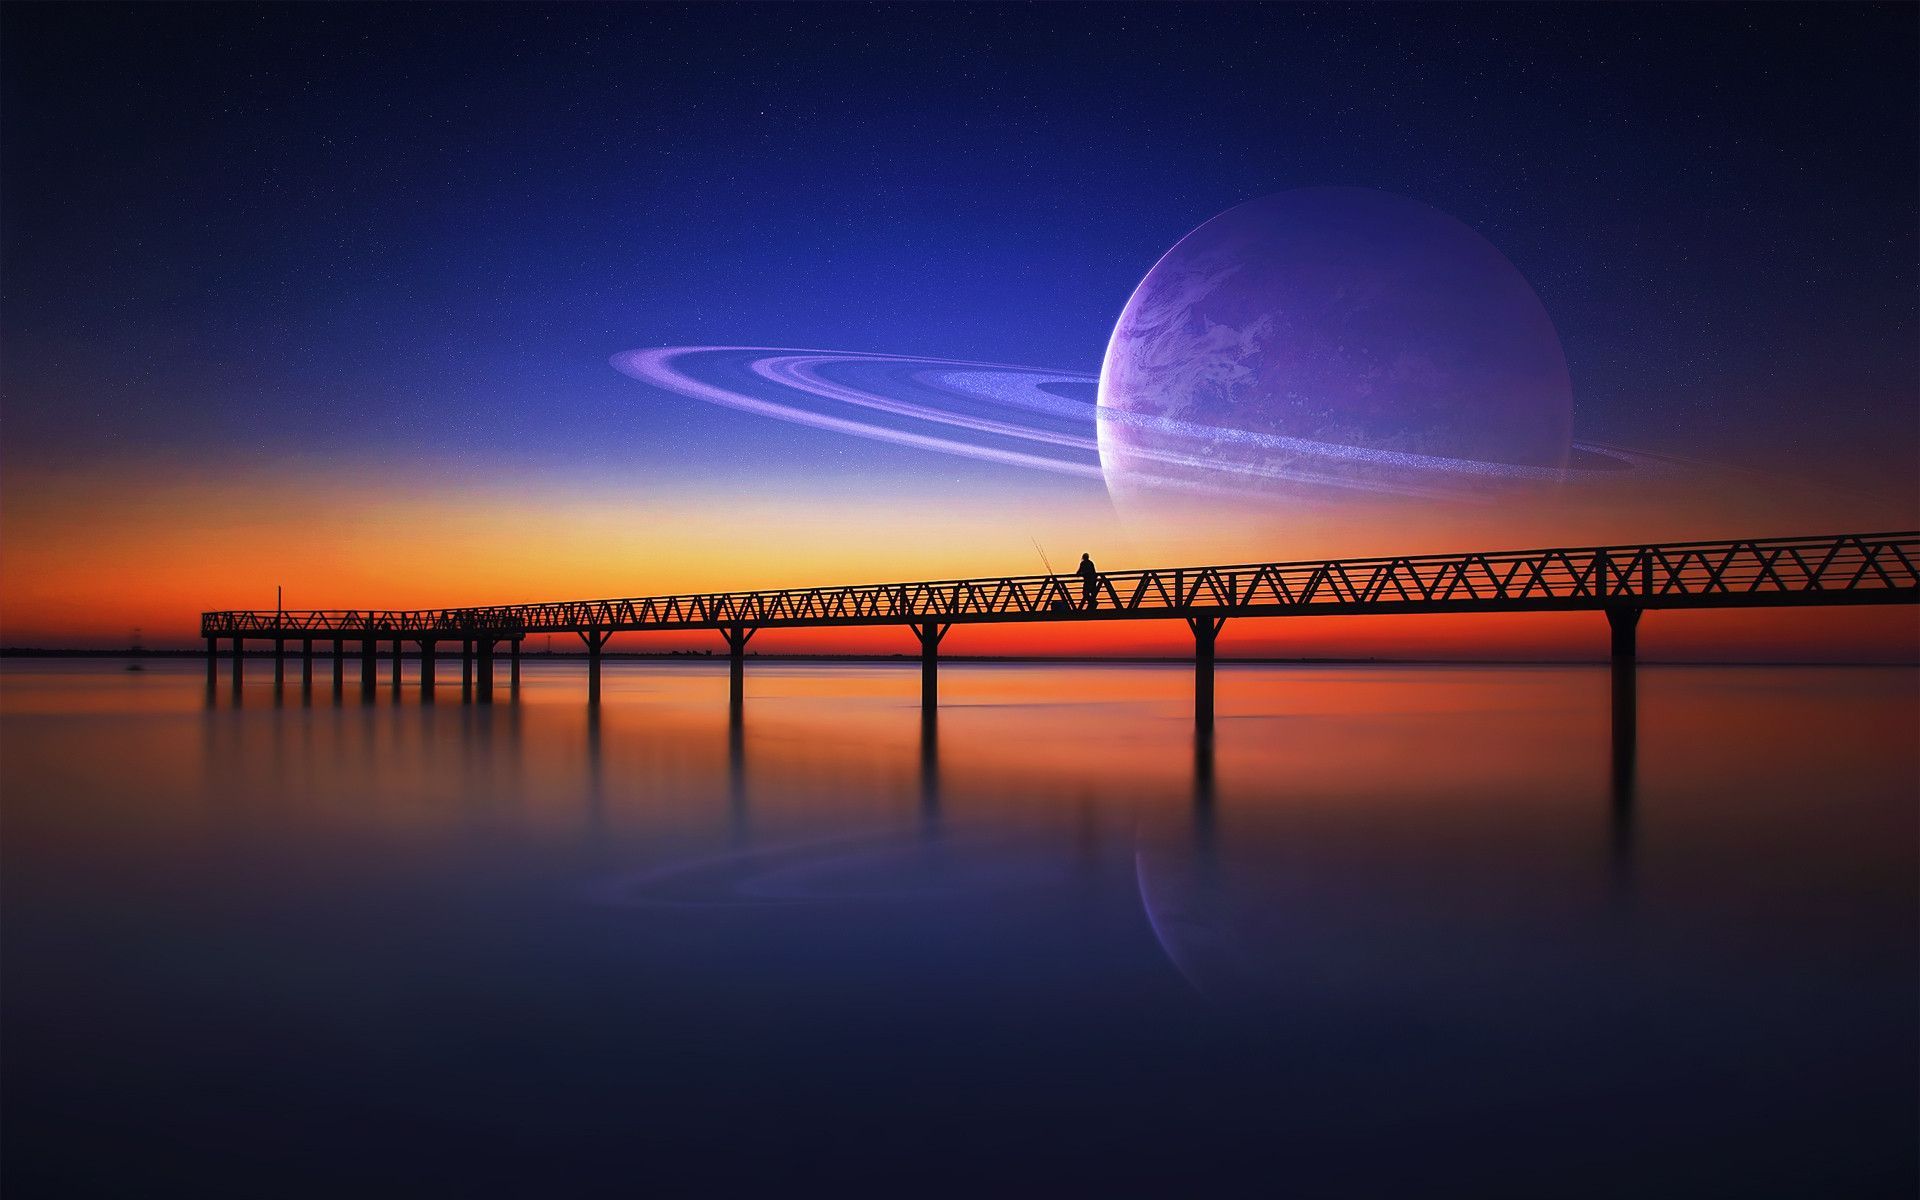 20+ Dreamy and Fantasy Desktop Wallpapers, Backgrounds, Image, Pictures